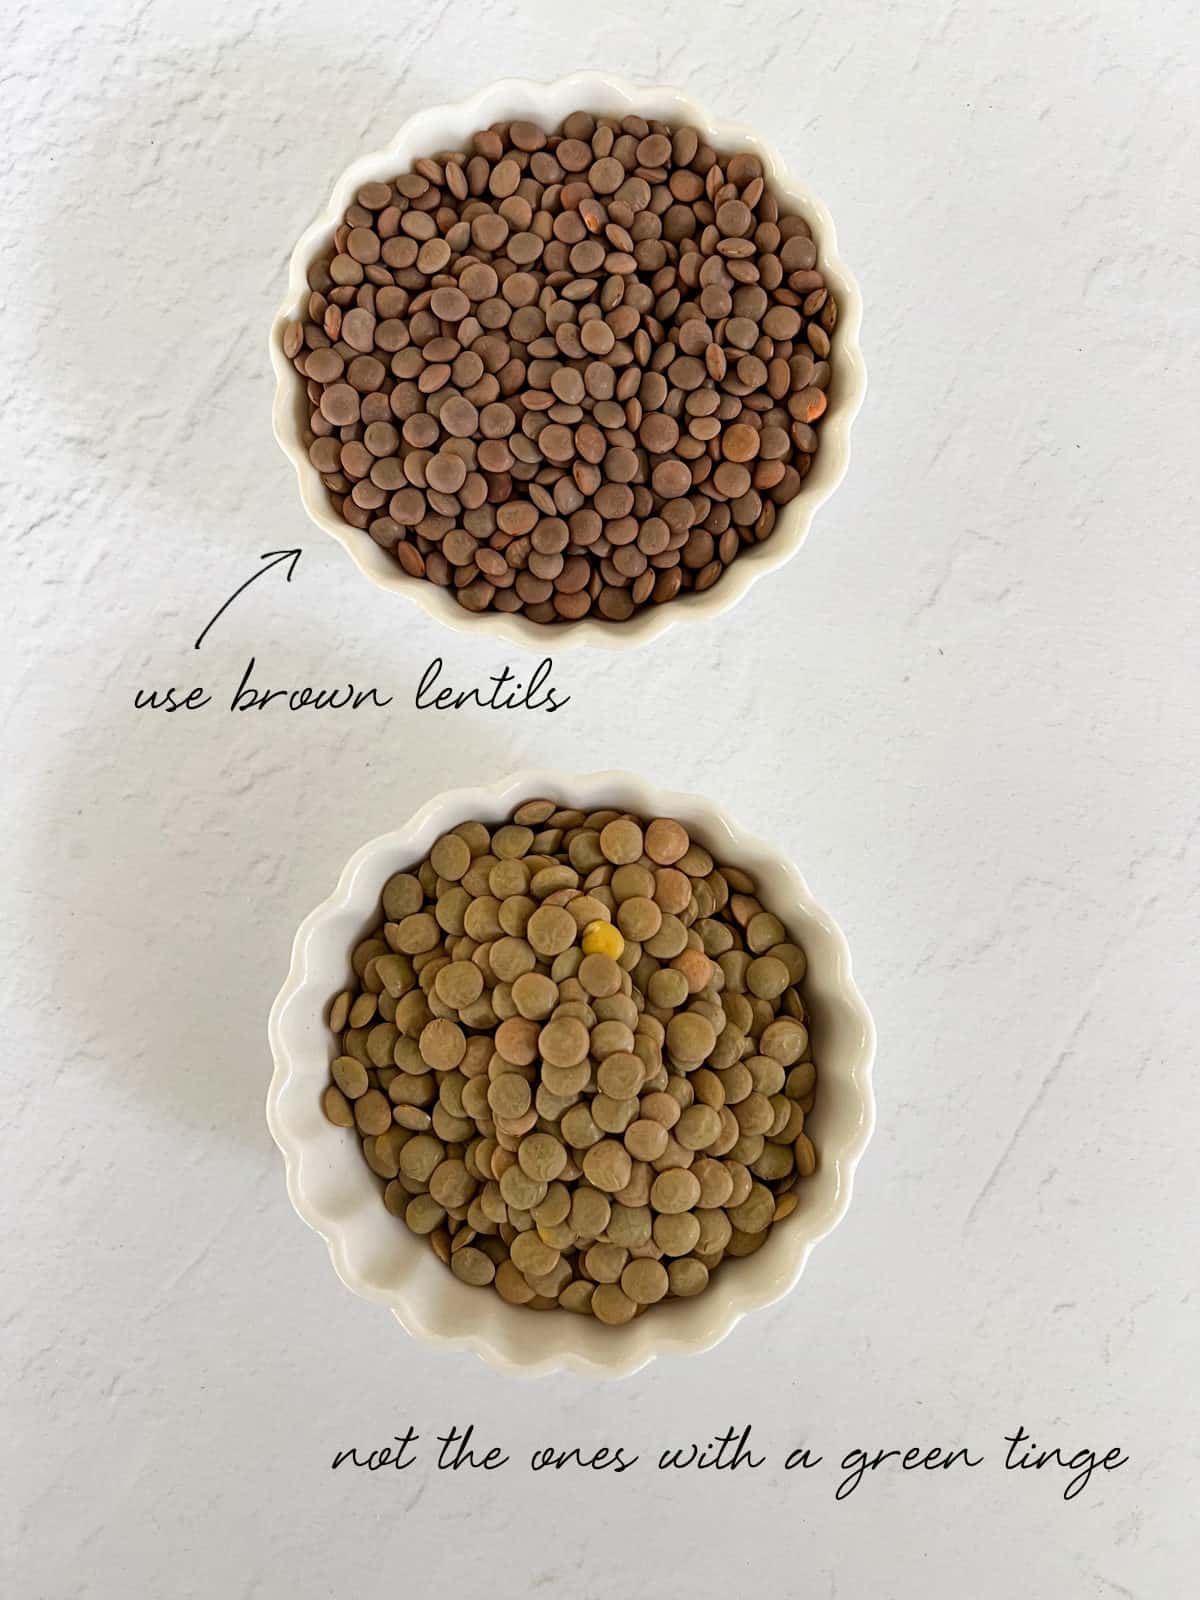 two bowls filled with either brown lentils or green lentils